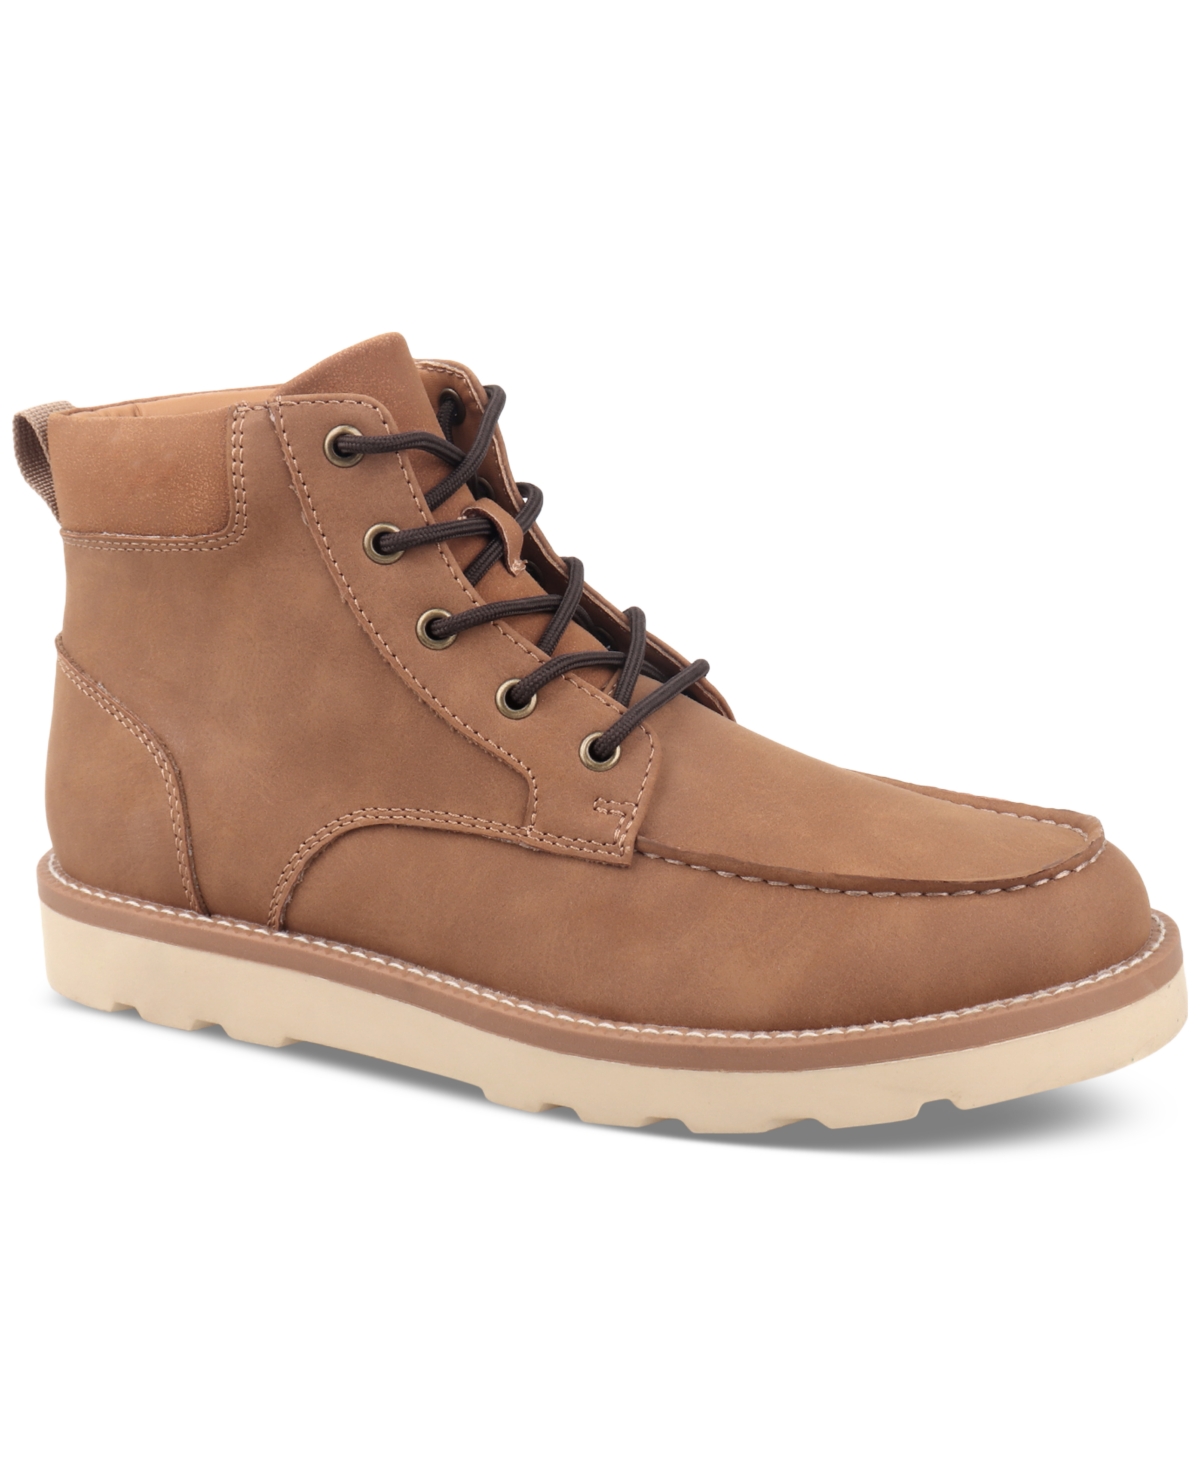 Club Room Men's Clifton Lace-Up Moc-Toe Boots, Created for Macy's Men's Shoes